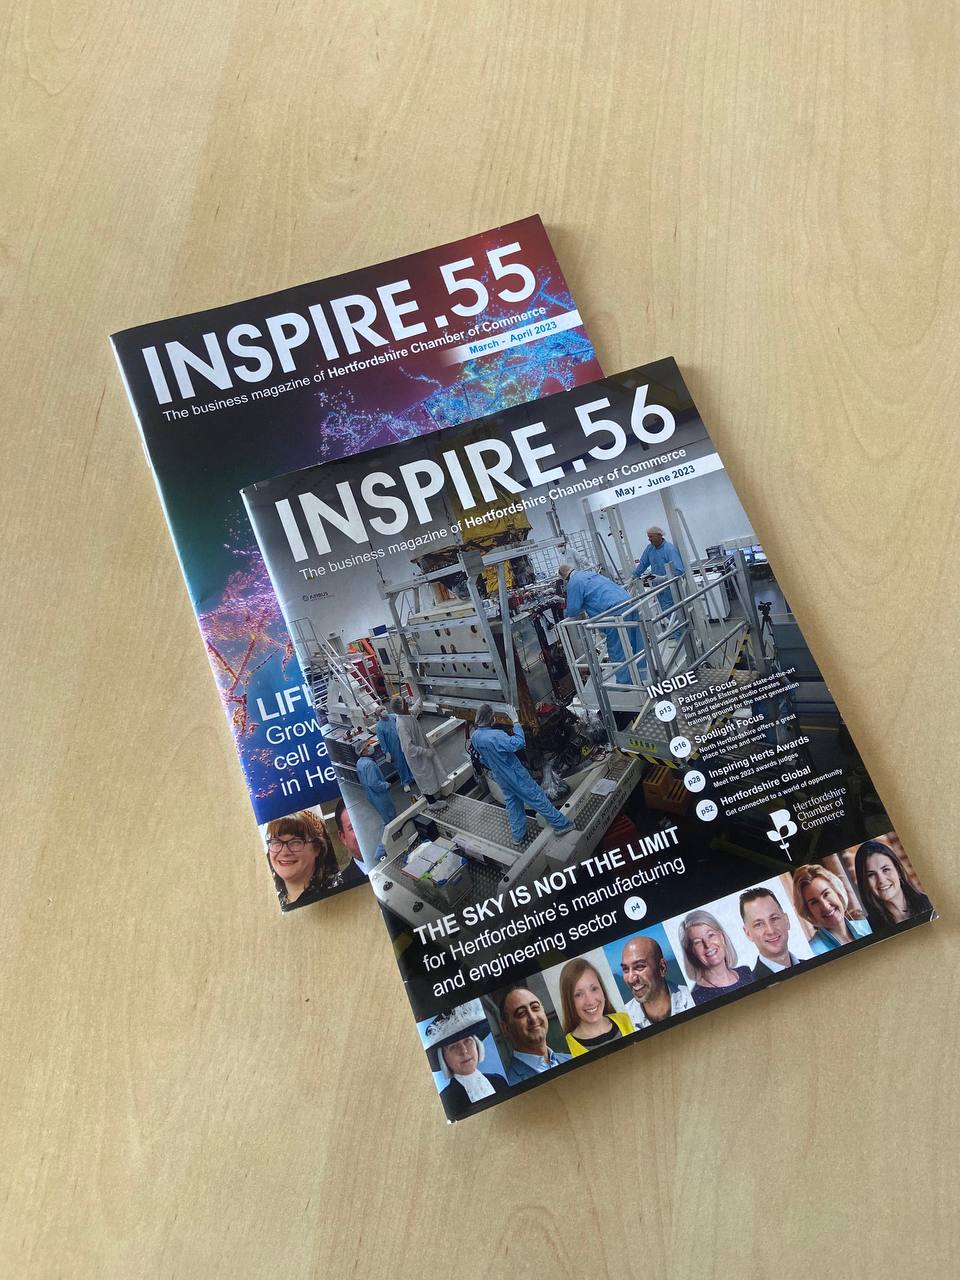 there are two copies of a magazine called Inspire 56, which is the business magazine of Hertfordshire Chamber of Commerce